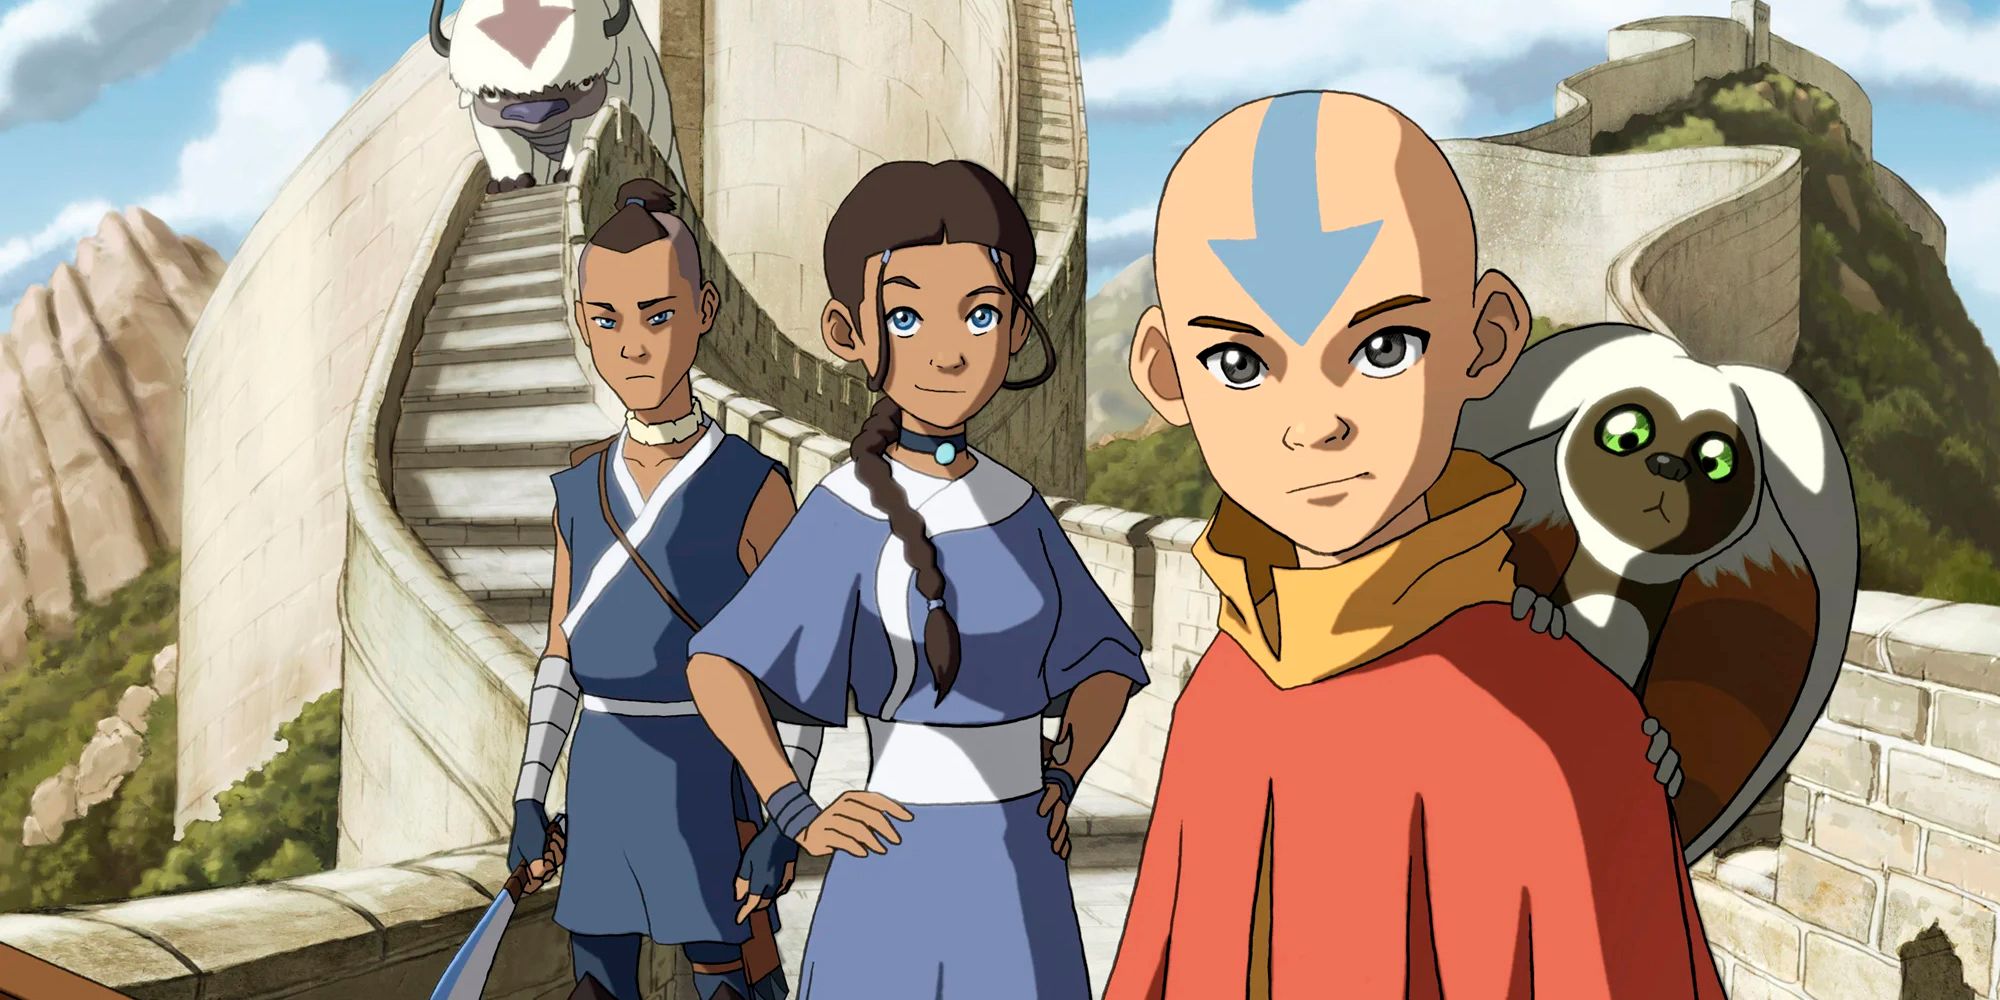 Avatar The Last Airbender The 10 Saddest Things About Katara